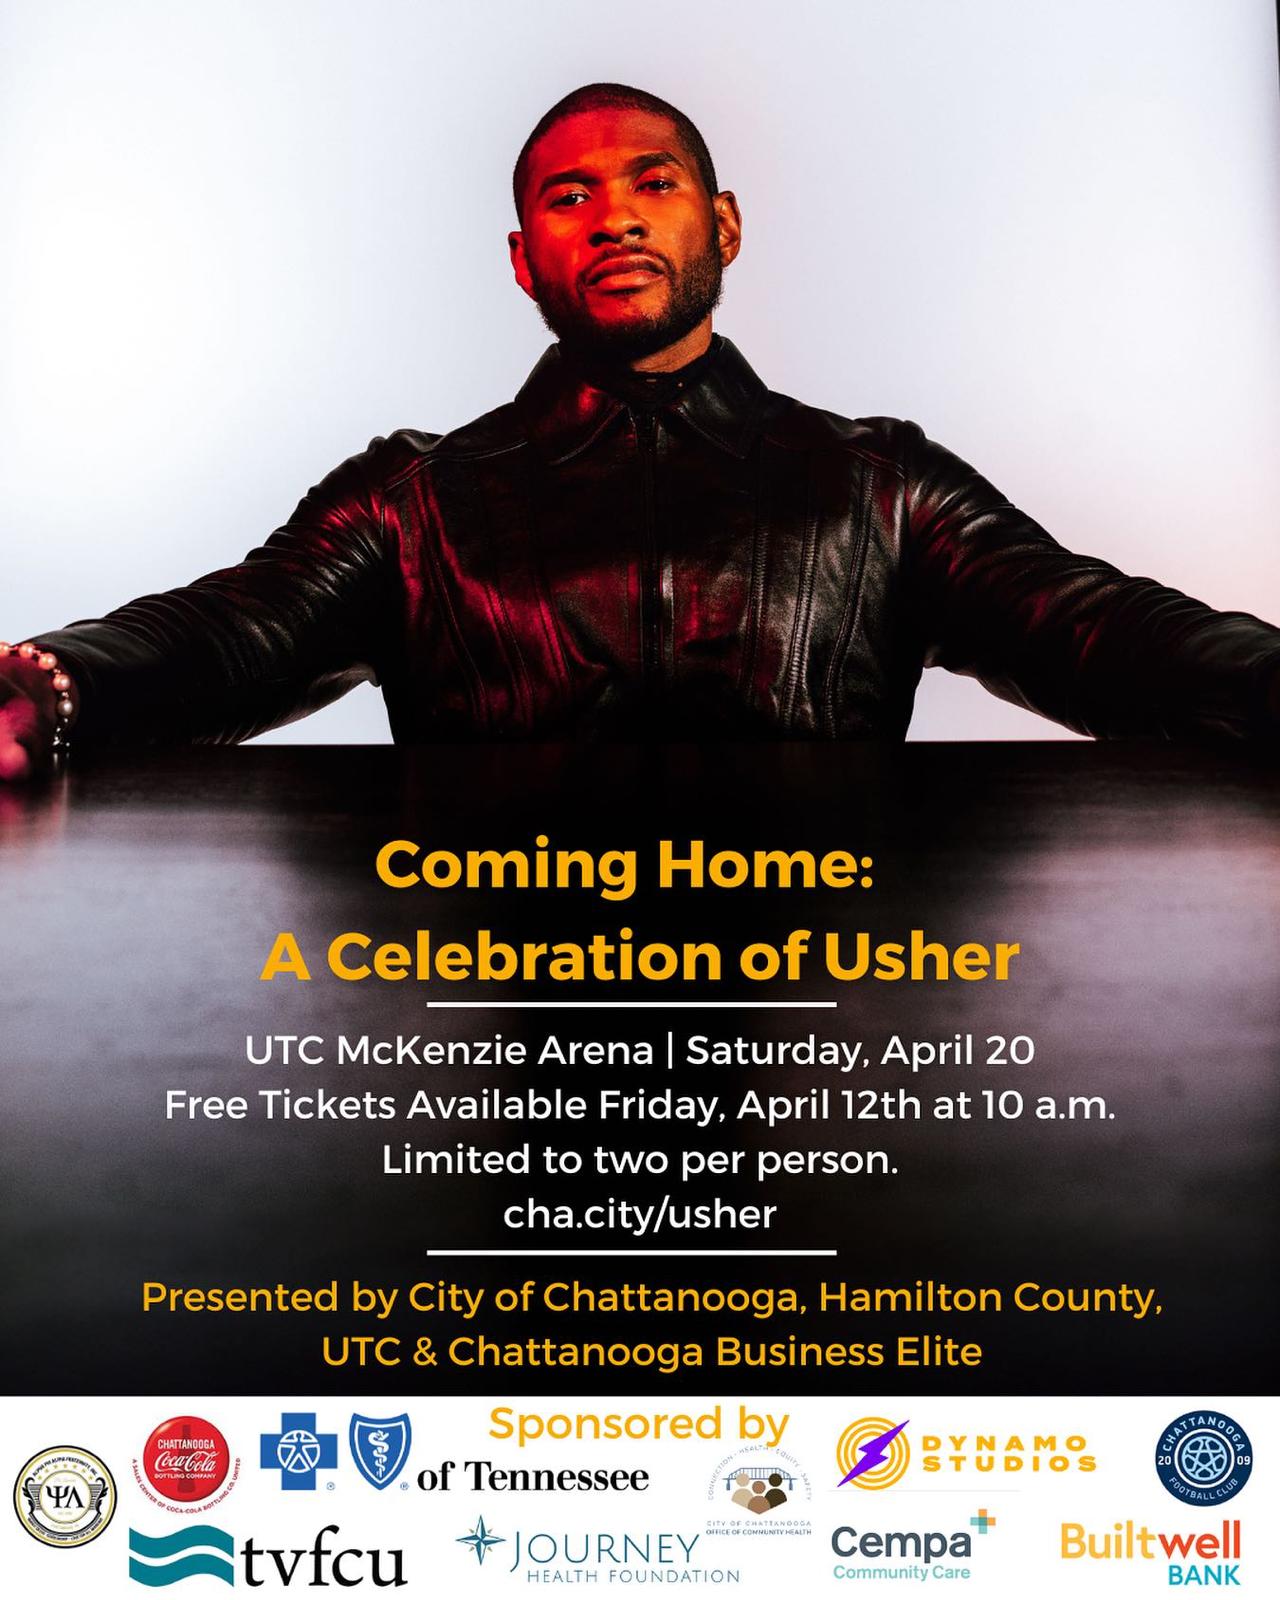 Usher Honored with a Key to the City of Chattanooga on 4/20 #Usher